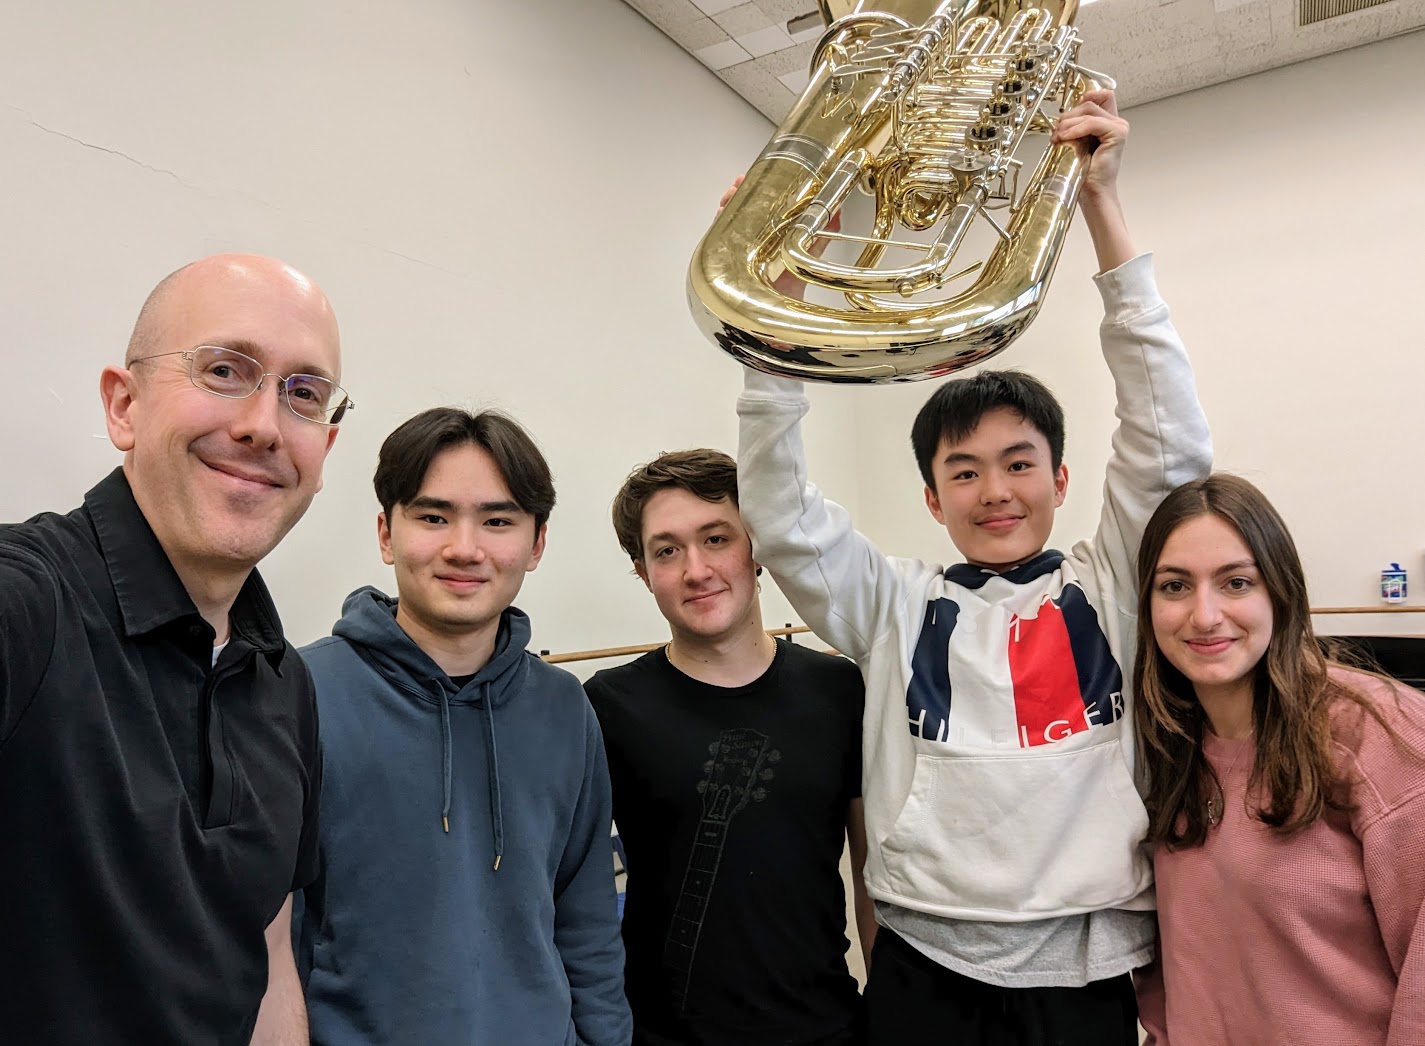 The students and their teacher stand in a semi-circle. They are dressed casually and one of the musicians displays his tuba. THey smile.